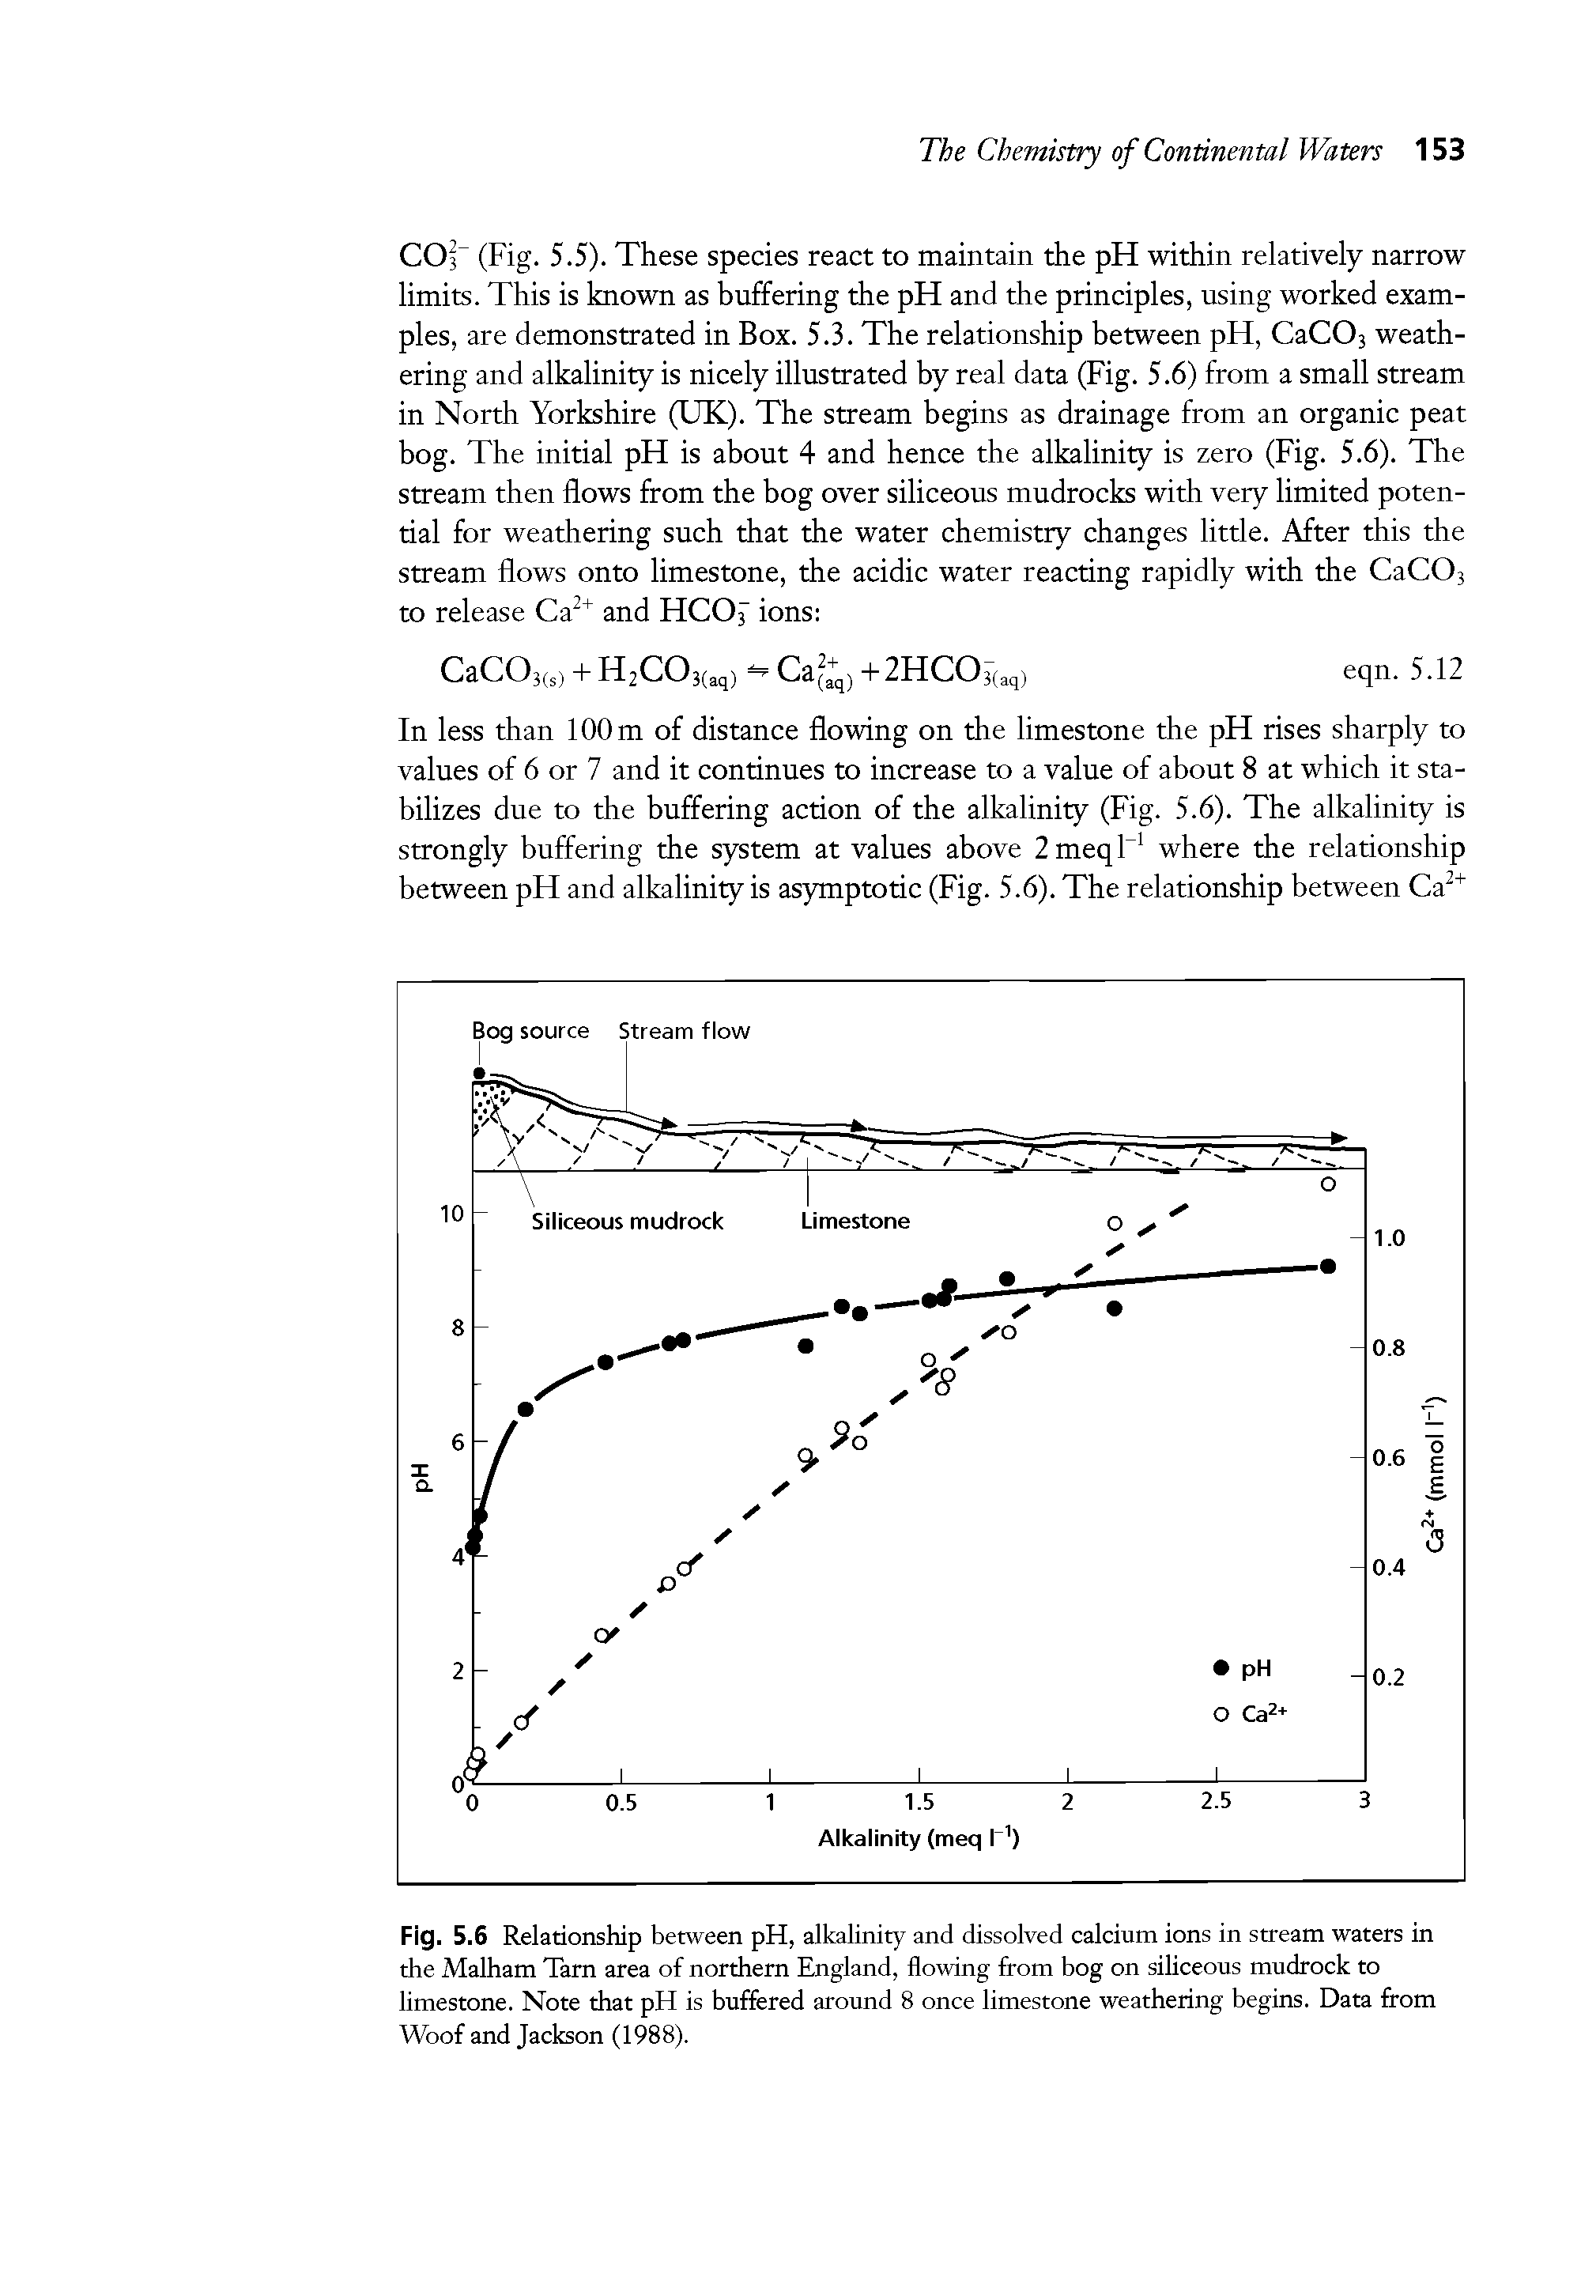 Fig. 5.6 Relationship between pH, alkalinity and dissolved calcium ions in stream waters in the Malham Tarn area of northern England, flowing from bog on siliceous mudrock to limestone. Note that pH is buffered around 8 once limestone weathering begins. Data from Woof and Jackson (1988).